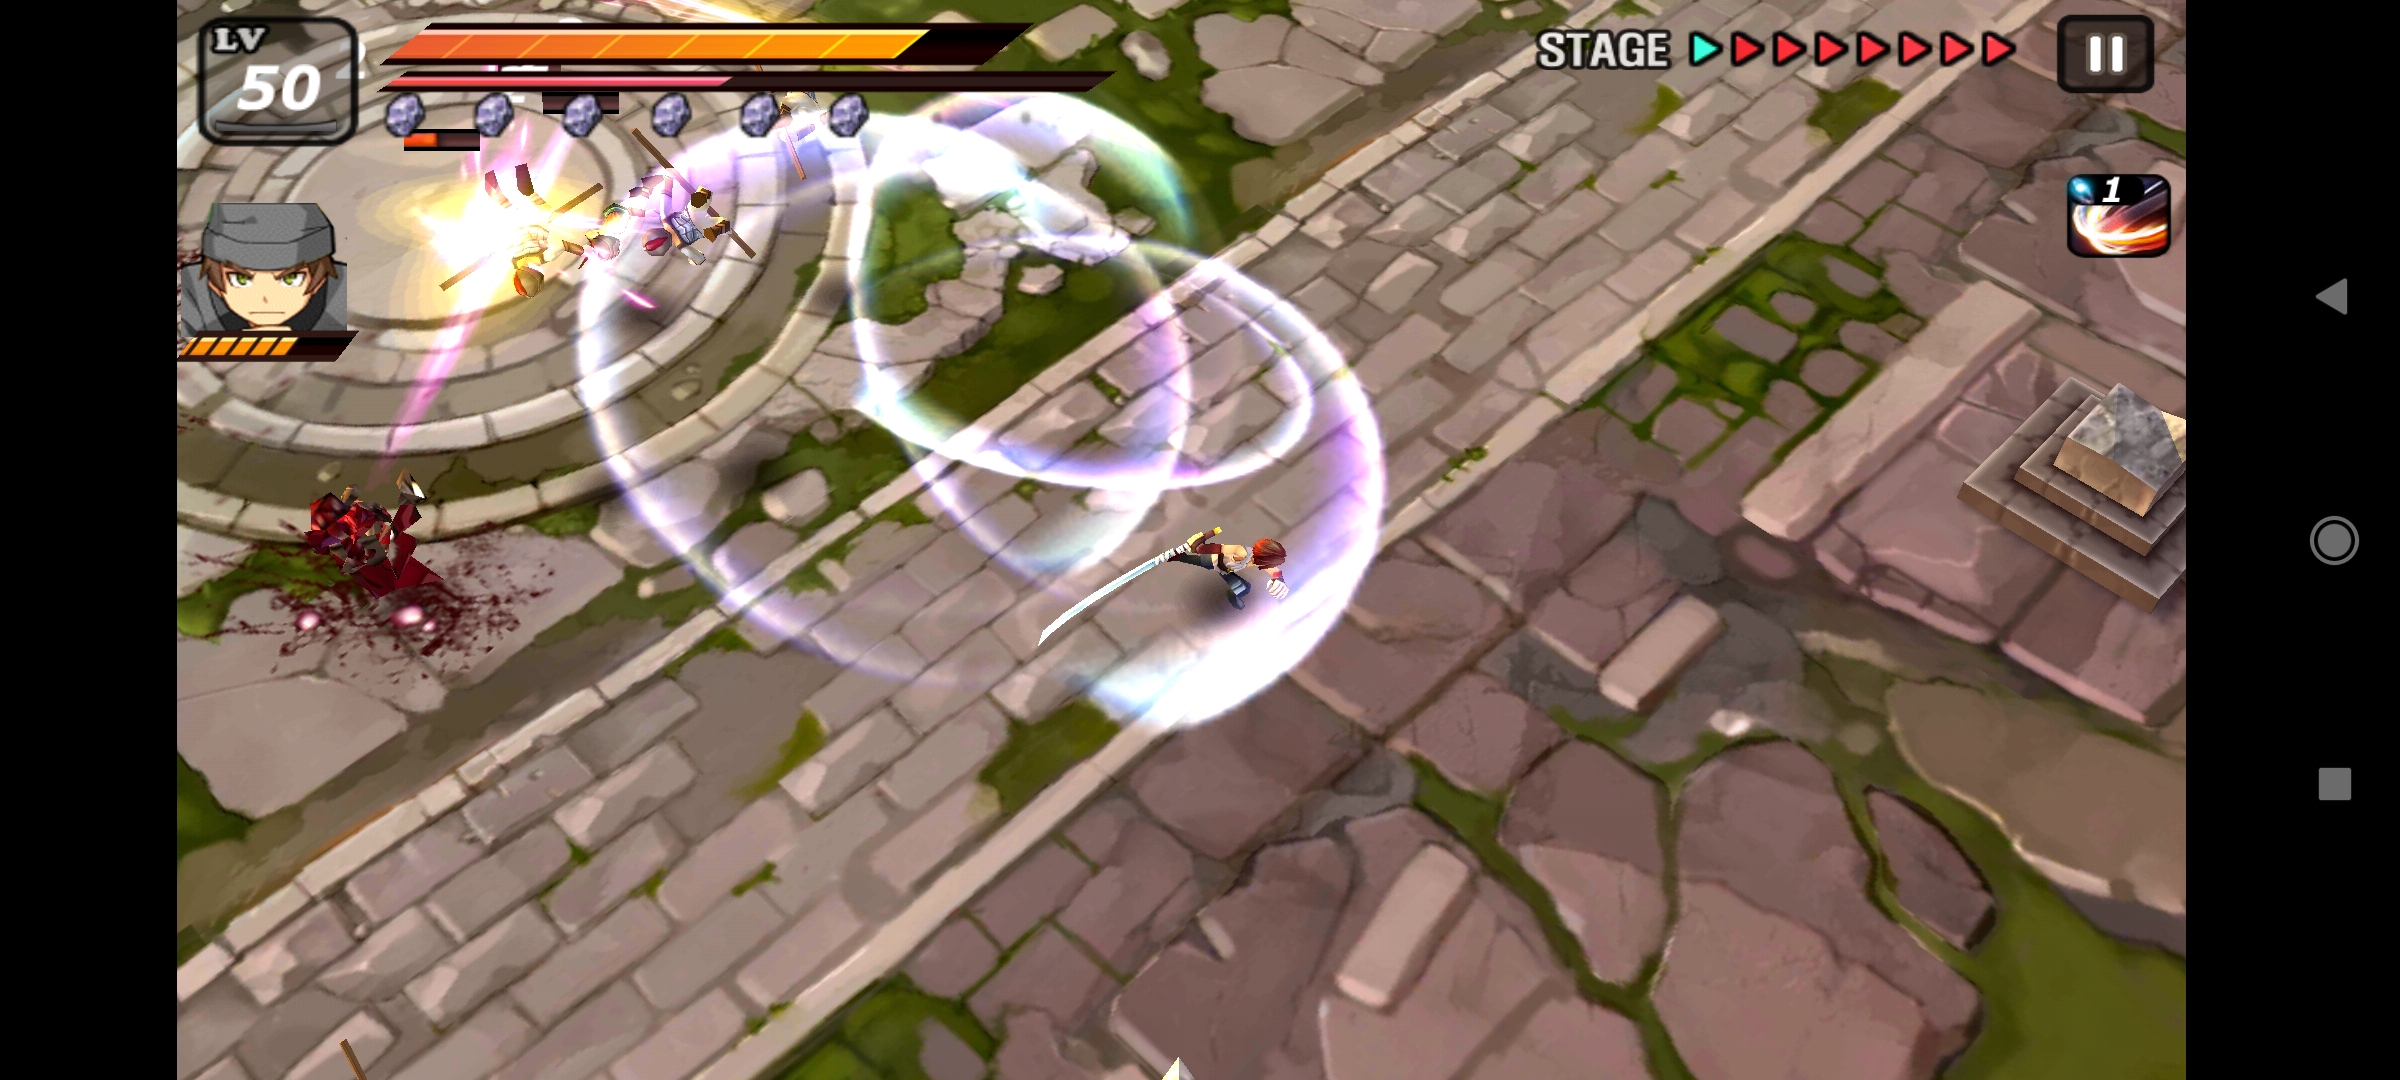 Game Devil Ninja Fight Cho Android